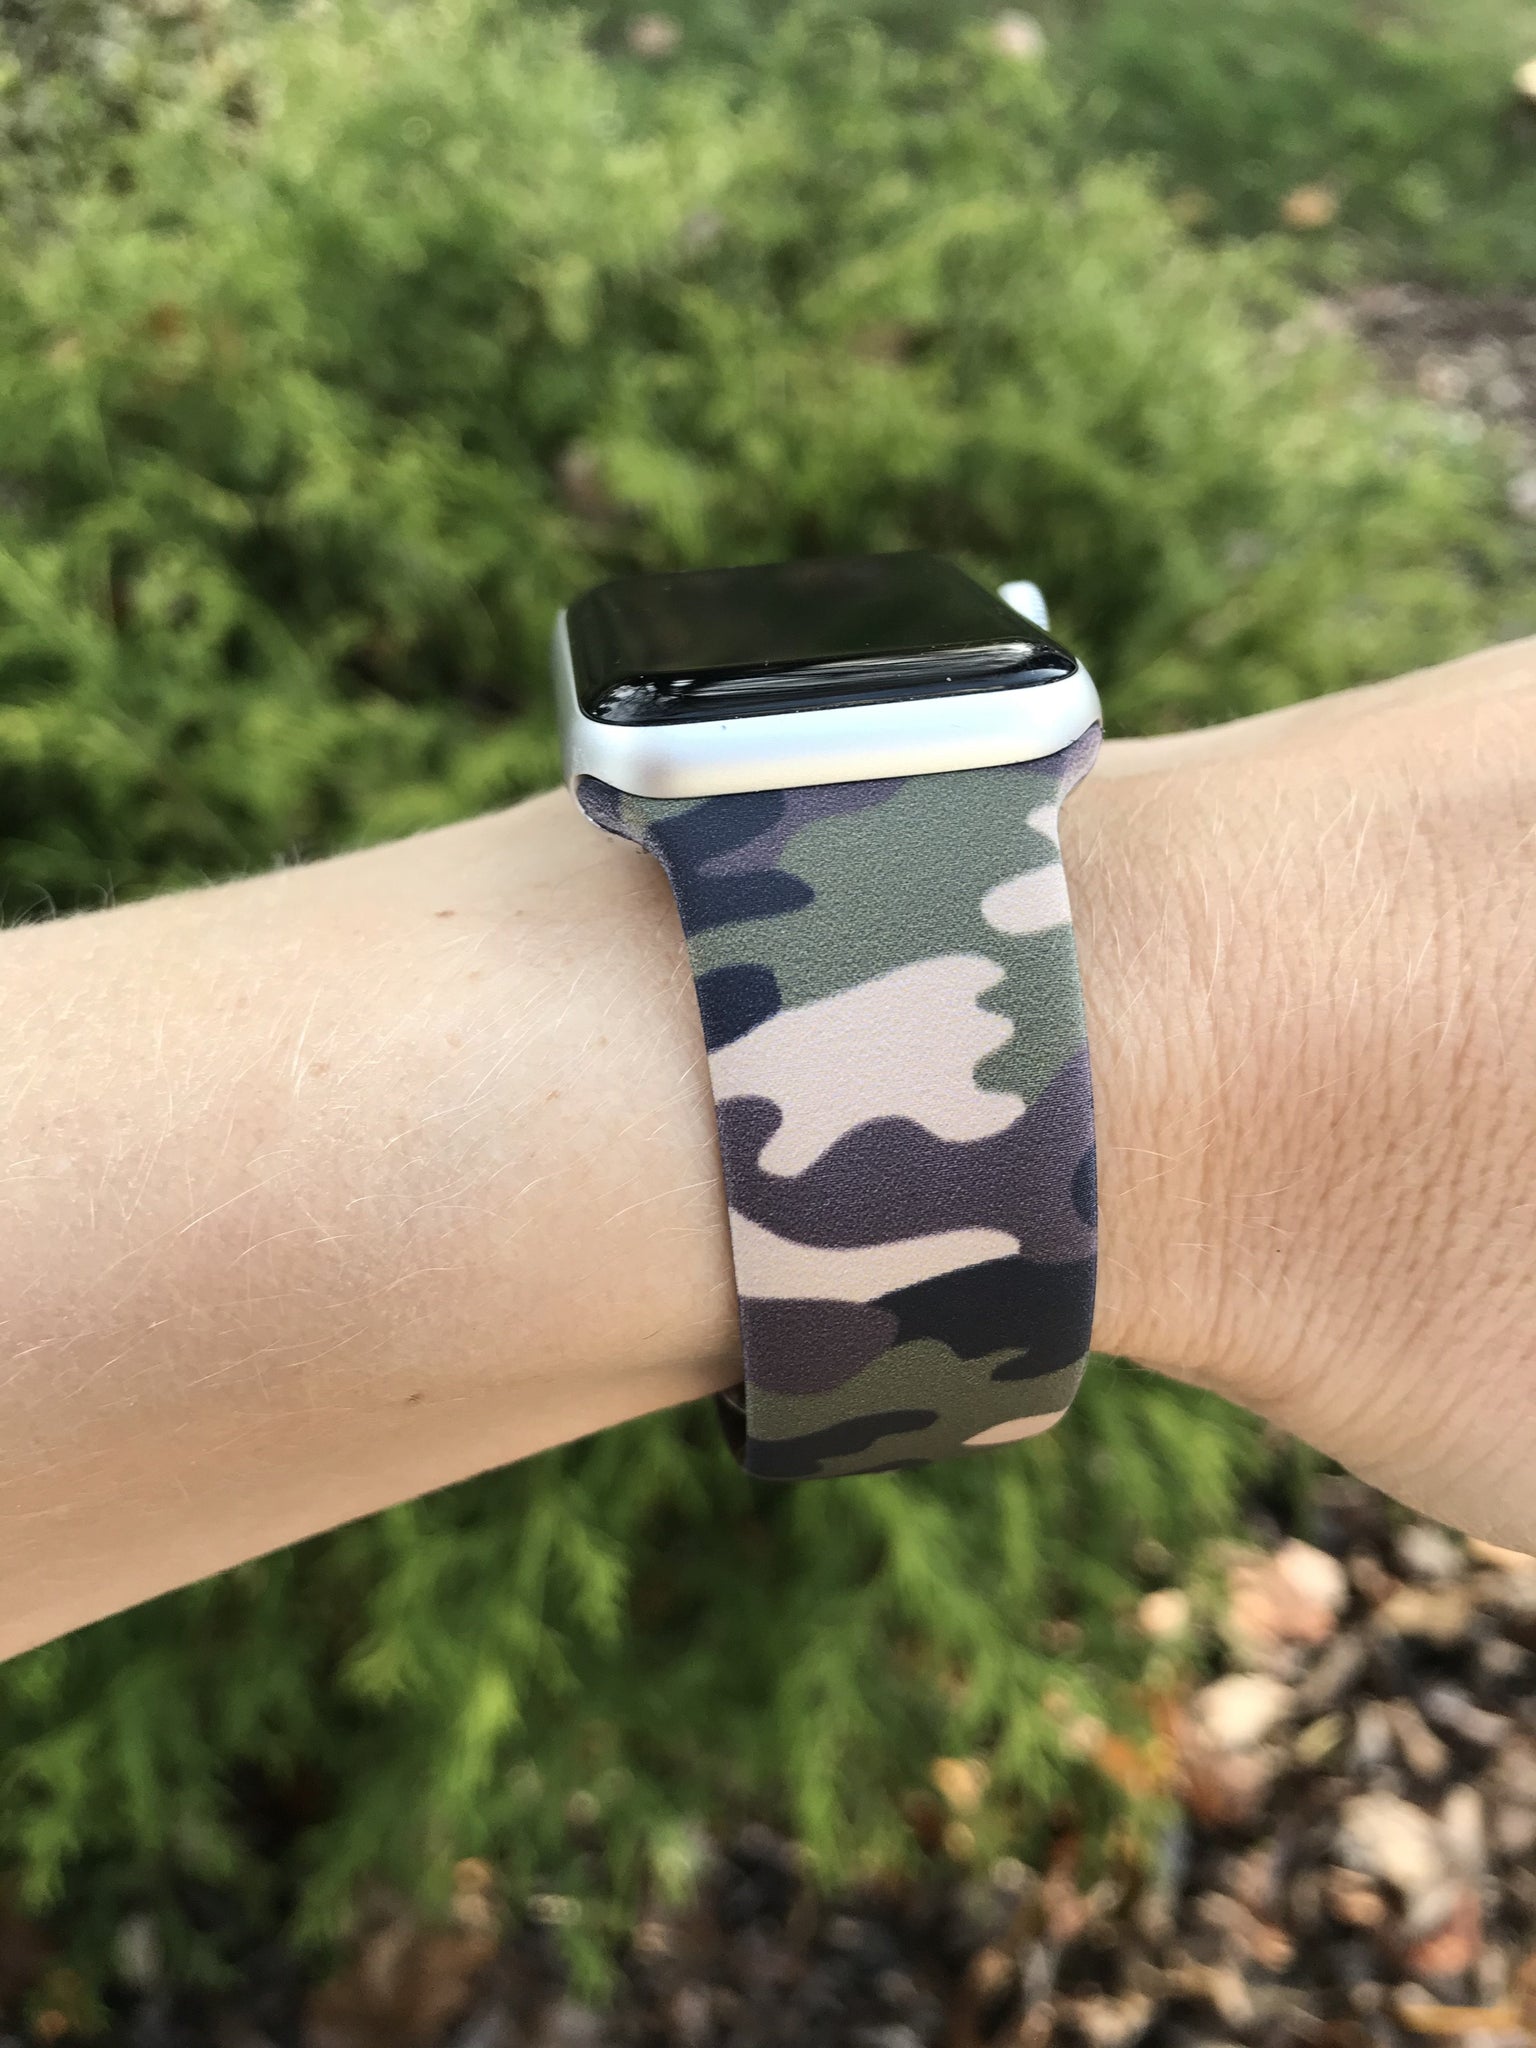 Camo Silicone Band for Apple Watch